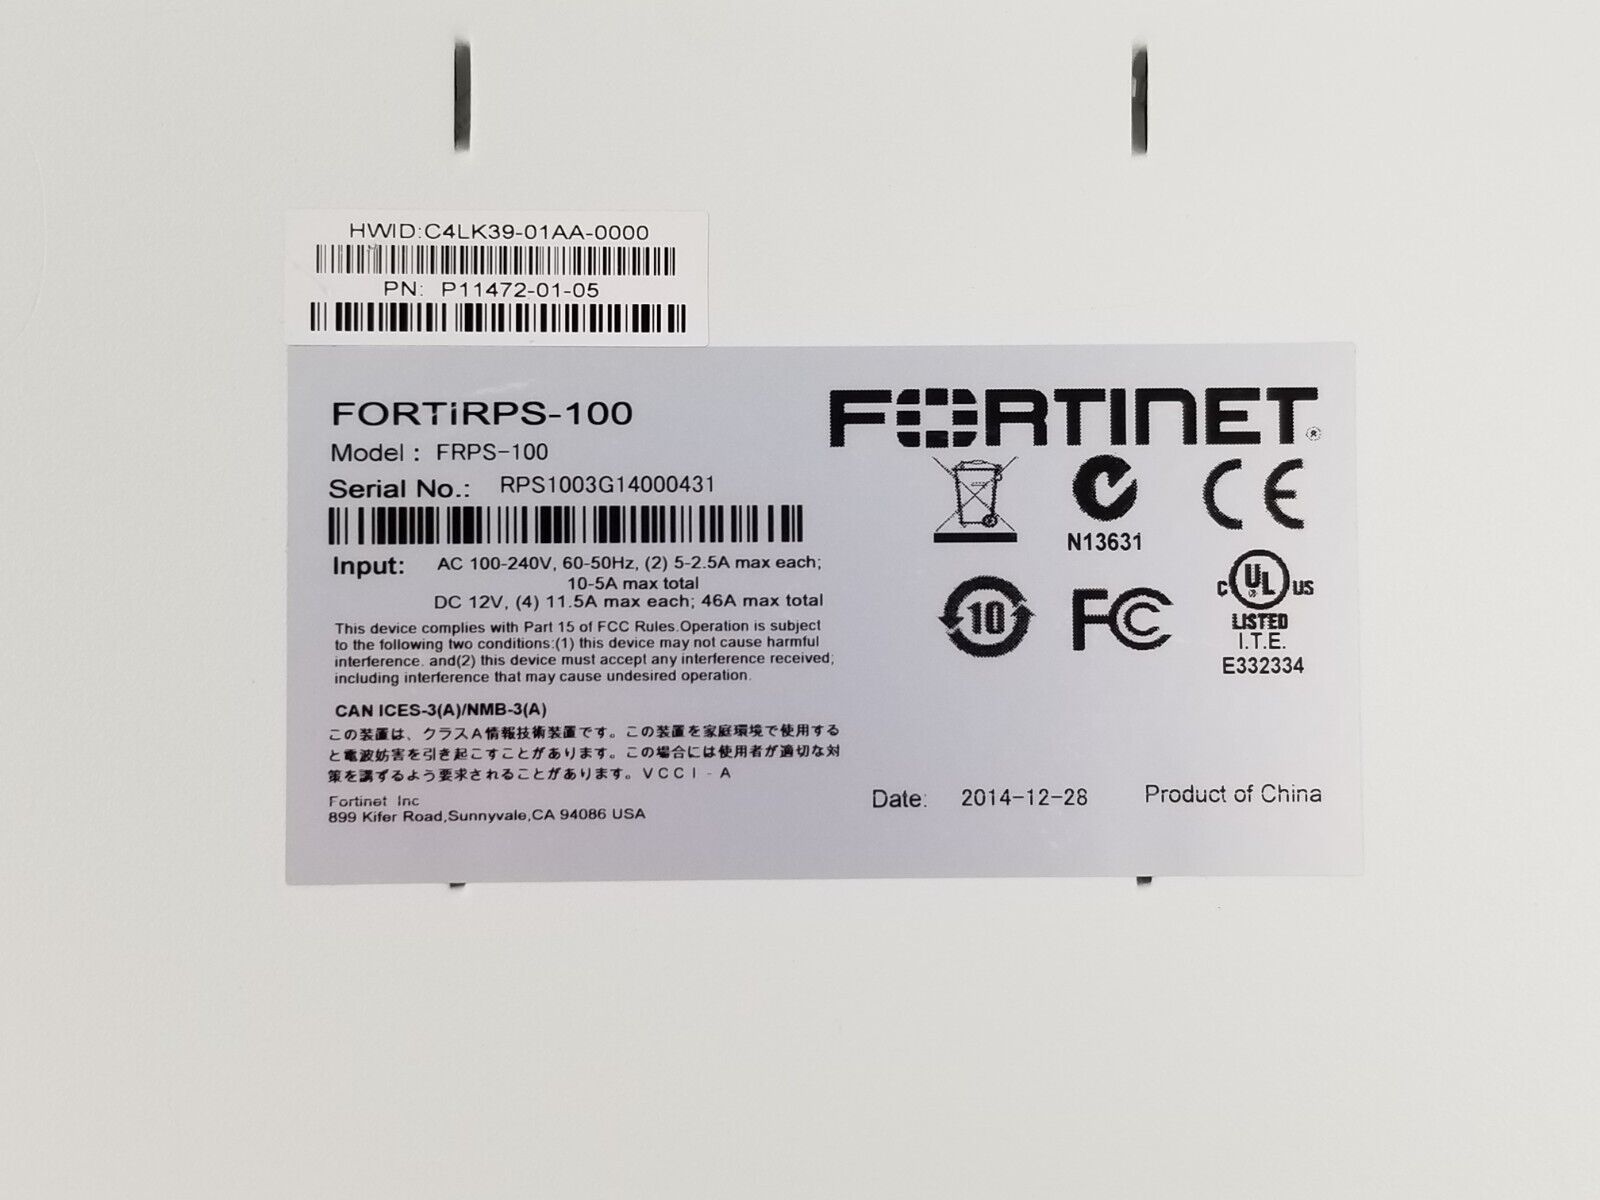 Fortinet FortiRPS 100 FRPS-100 Uninterruptible Power Supply - Tested